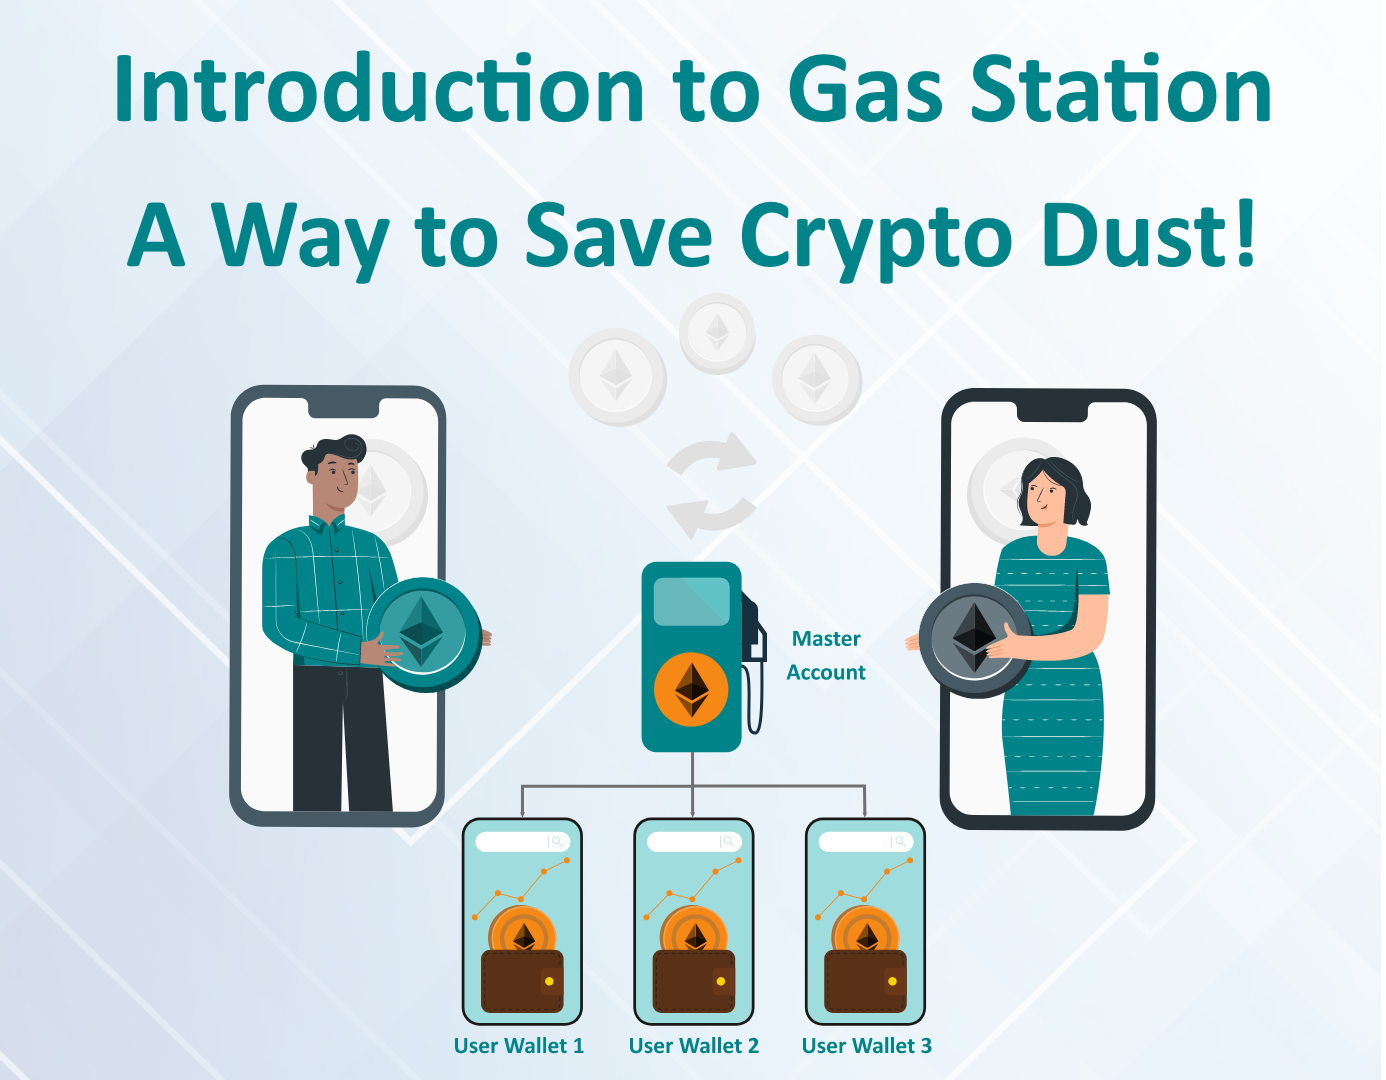 Introduction to Gas Station. A Way to Save Crypto Dust!